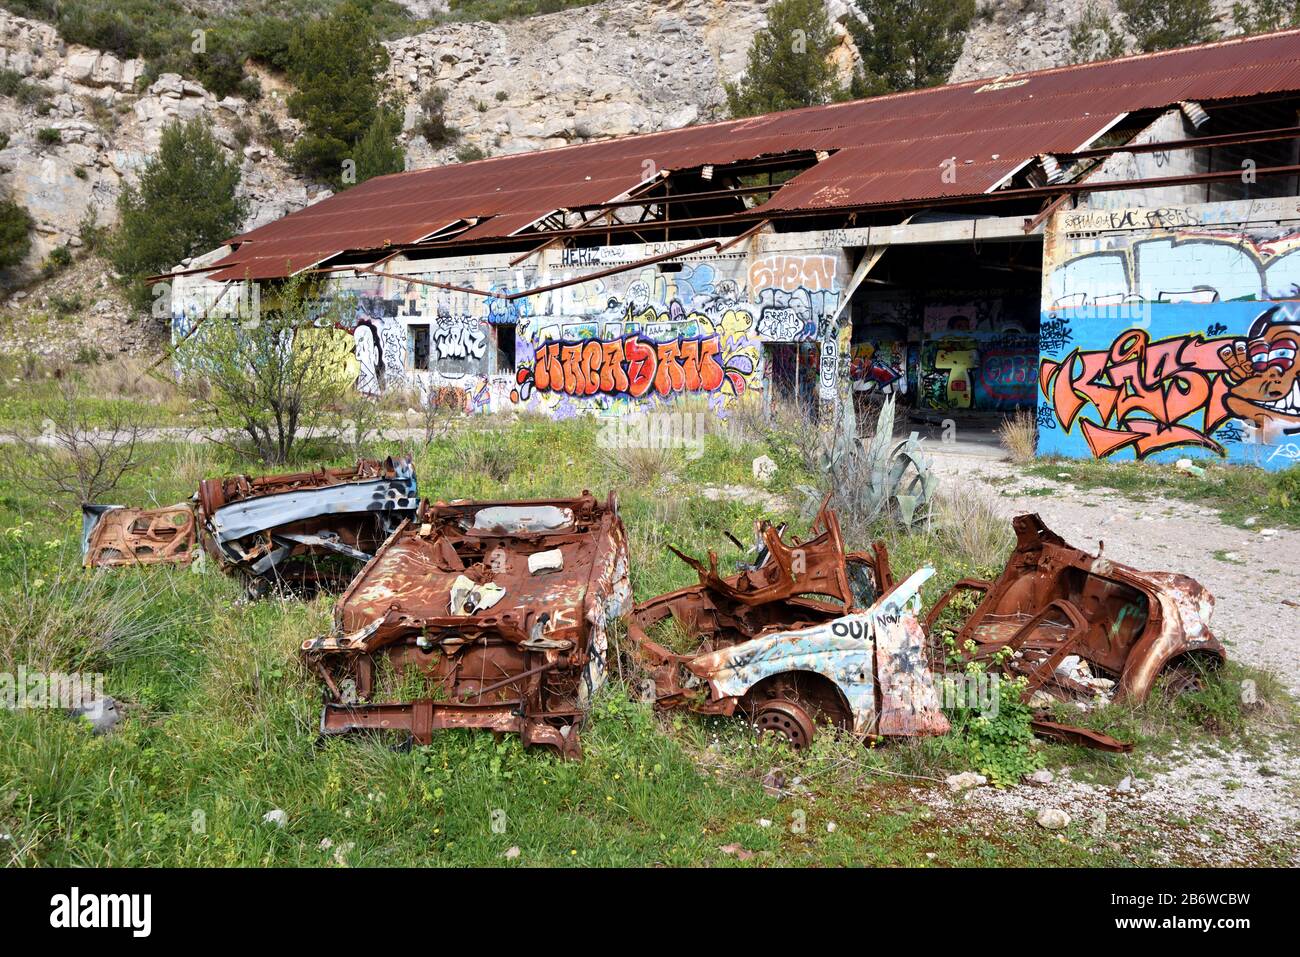 Abandoned Factory, Ruined Industrial Building & Rusty Wrecked Cars, an Urbex Site, in Marseille Provence France Stock Photo